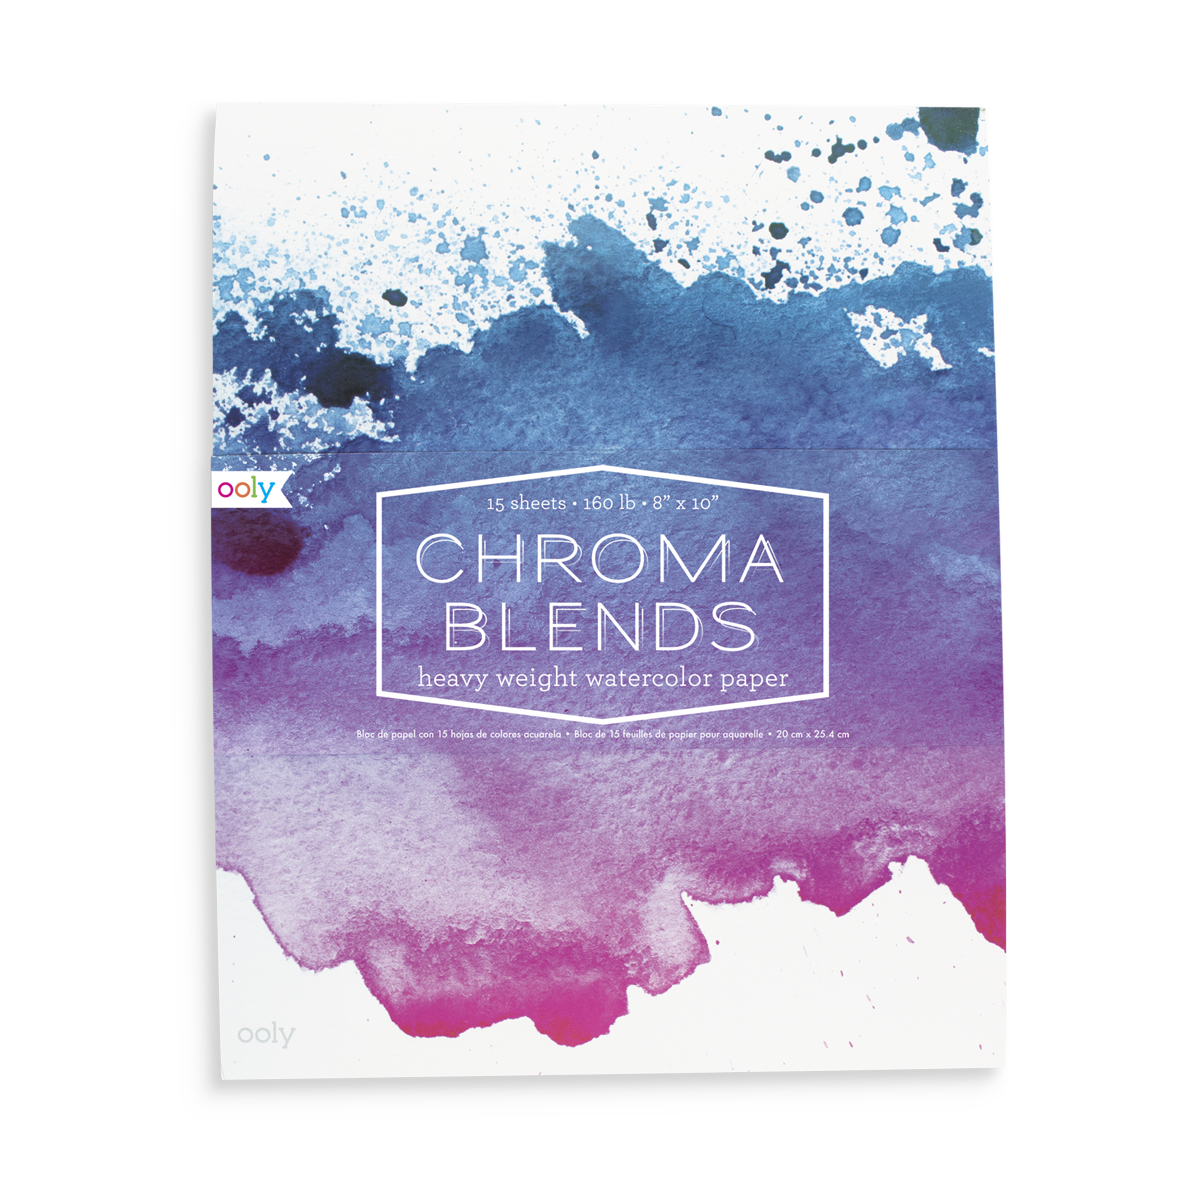 Chroma Blends Watercolor Paper with 15 sheets of quality paper